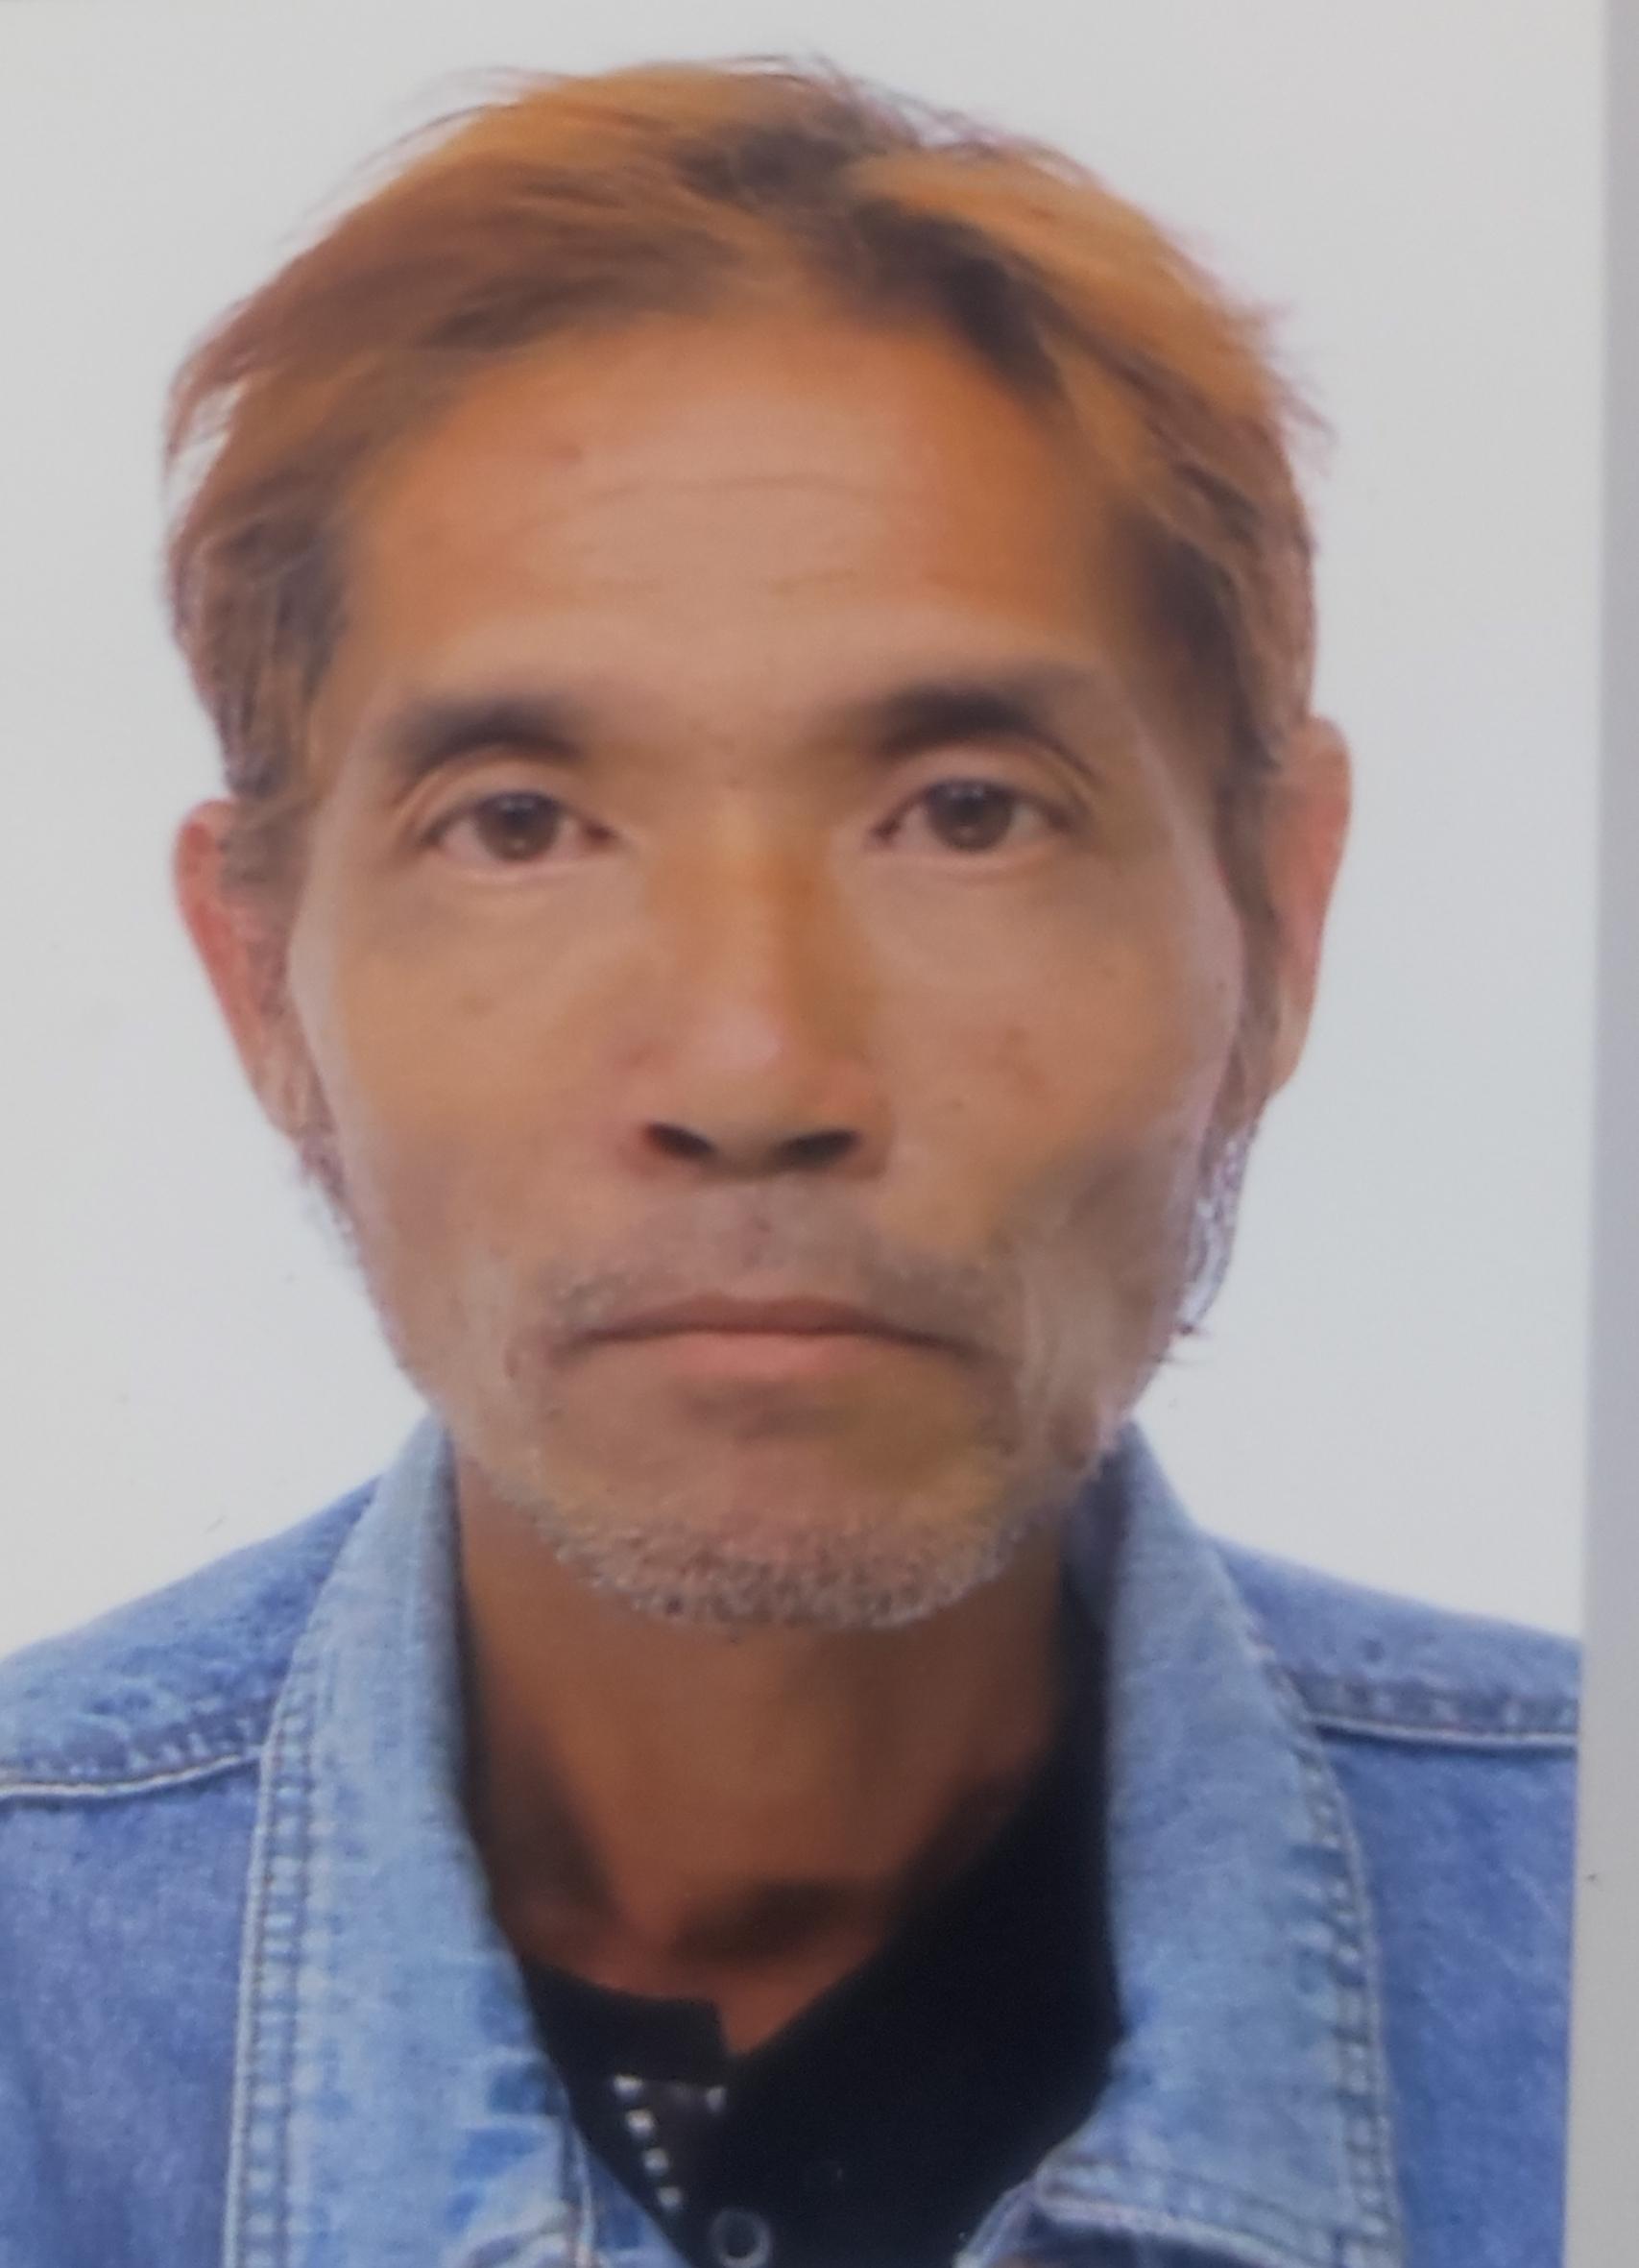 Lee Kam-cheong, aged 55, is about 1.68 metres tall, 50 kilograms in weight and of thin build. He has a long face with yellow complexion and short brown hair.